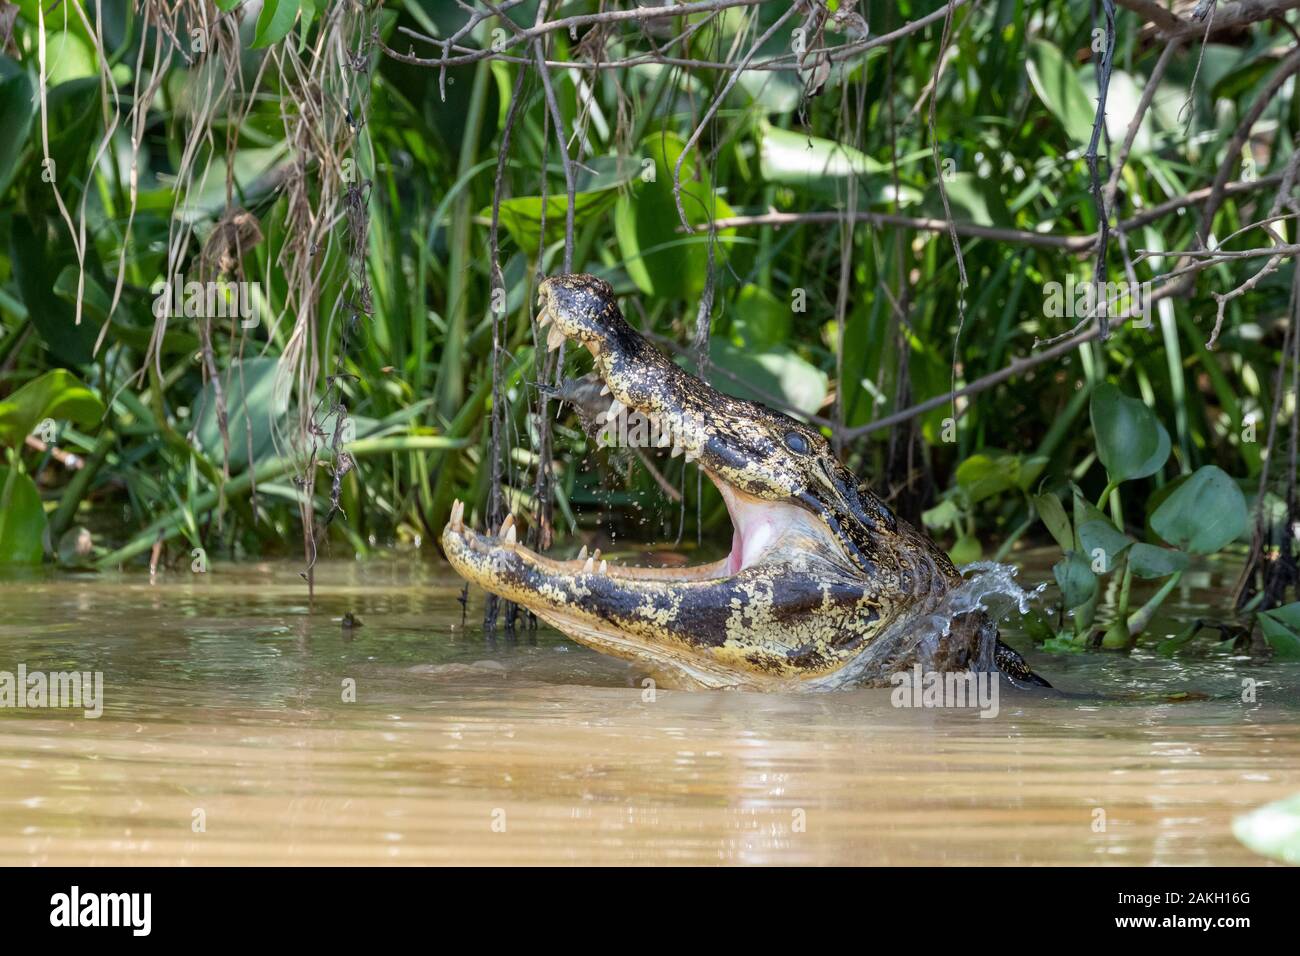 Brazil, Mato Grosso, Pantanal area, Spectacled caiman (Caiman crocodilus), eating a fish Stock Photo